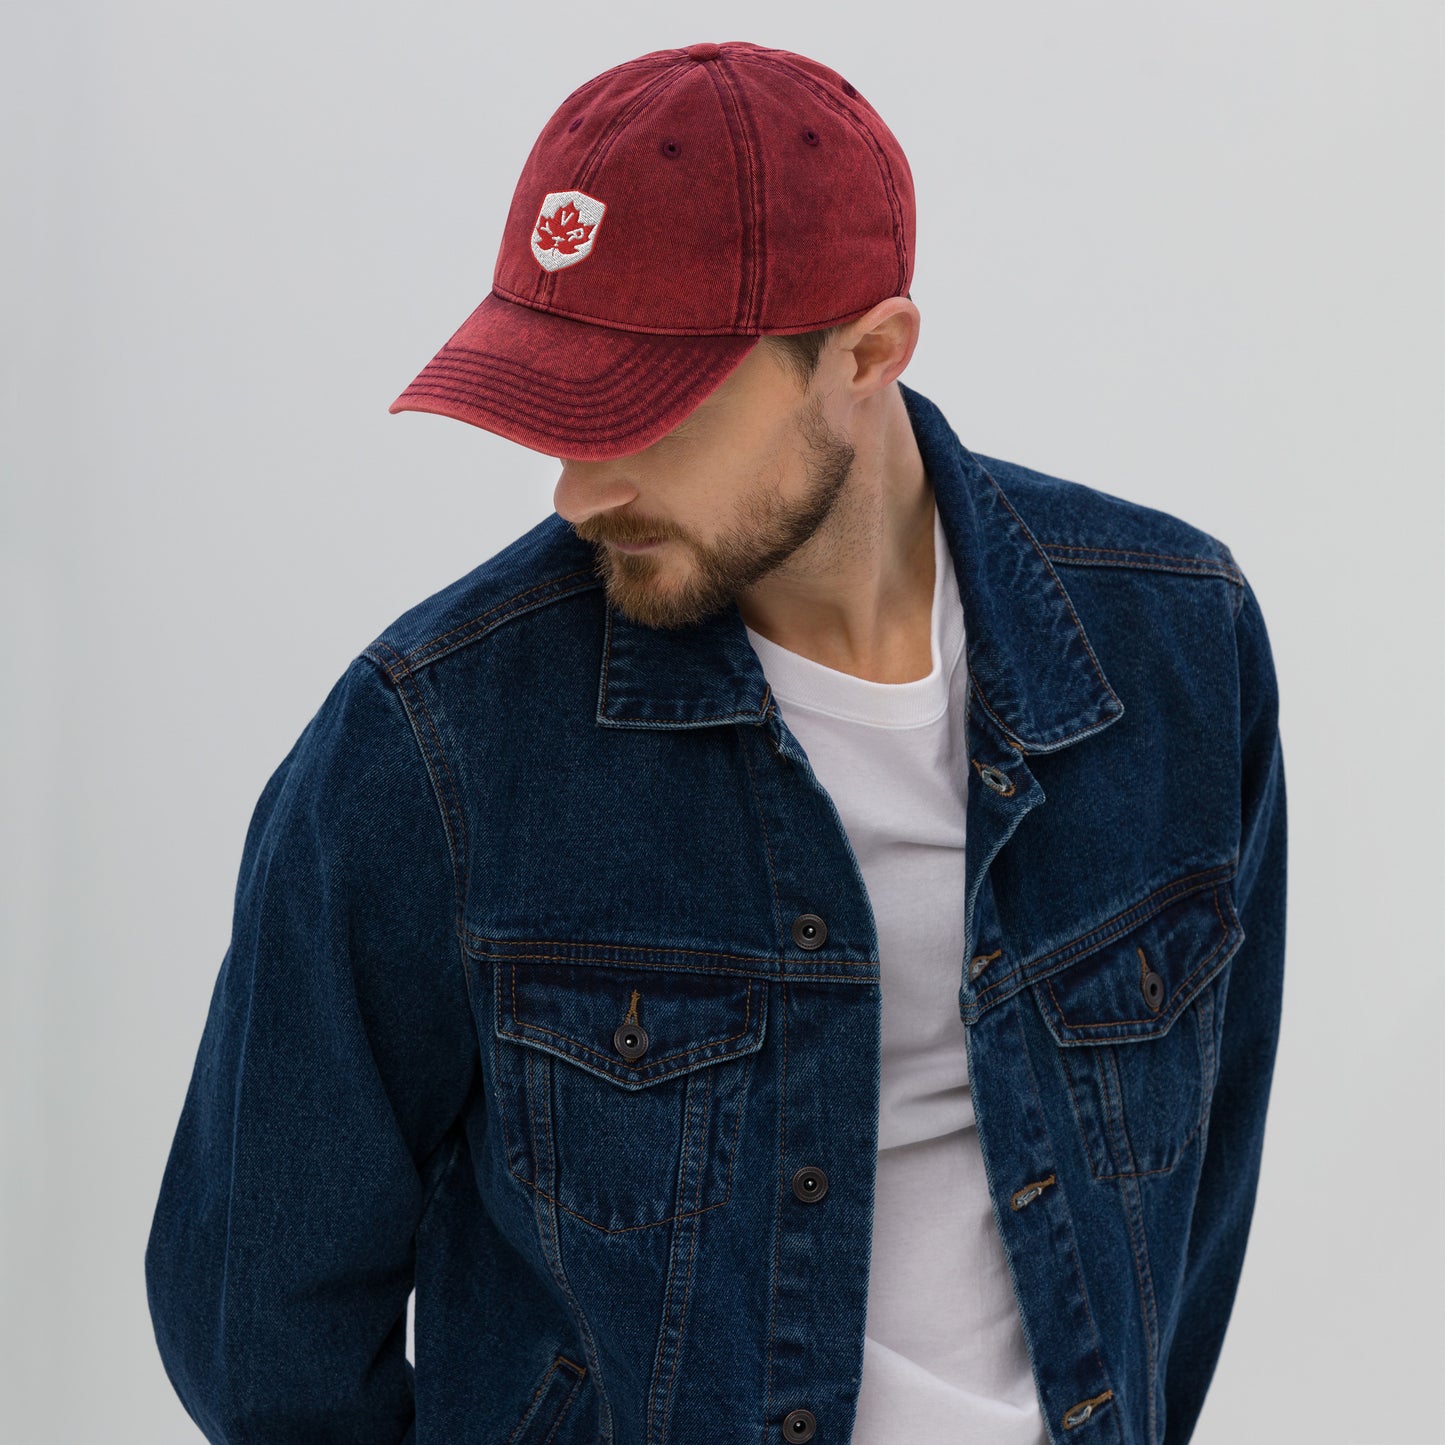 Maple Leaf Twill Cap - Red/White • YVR Vancouver • YHM Designs - Image 08